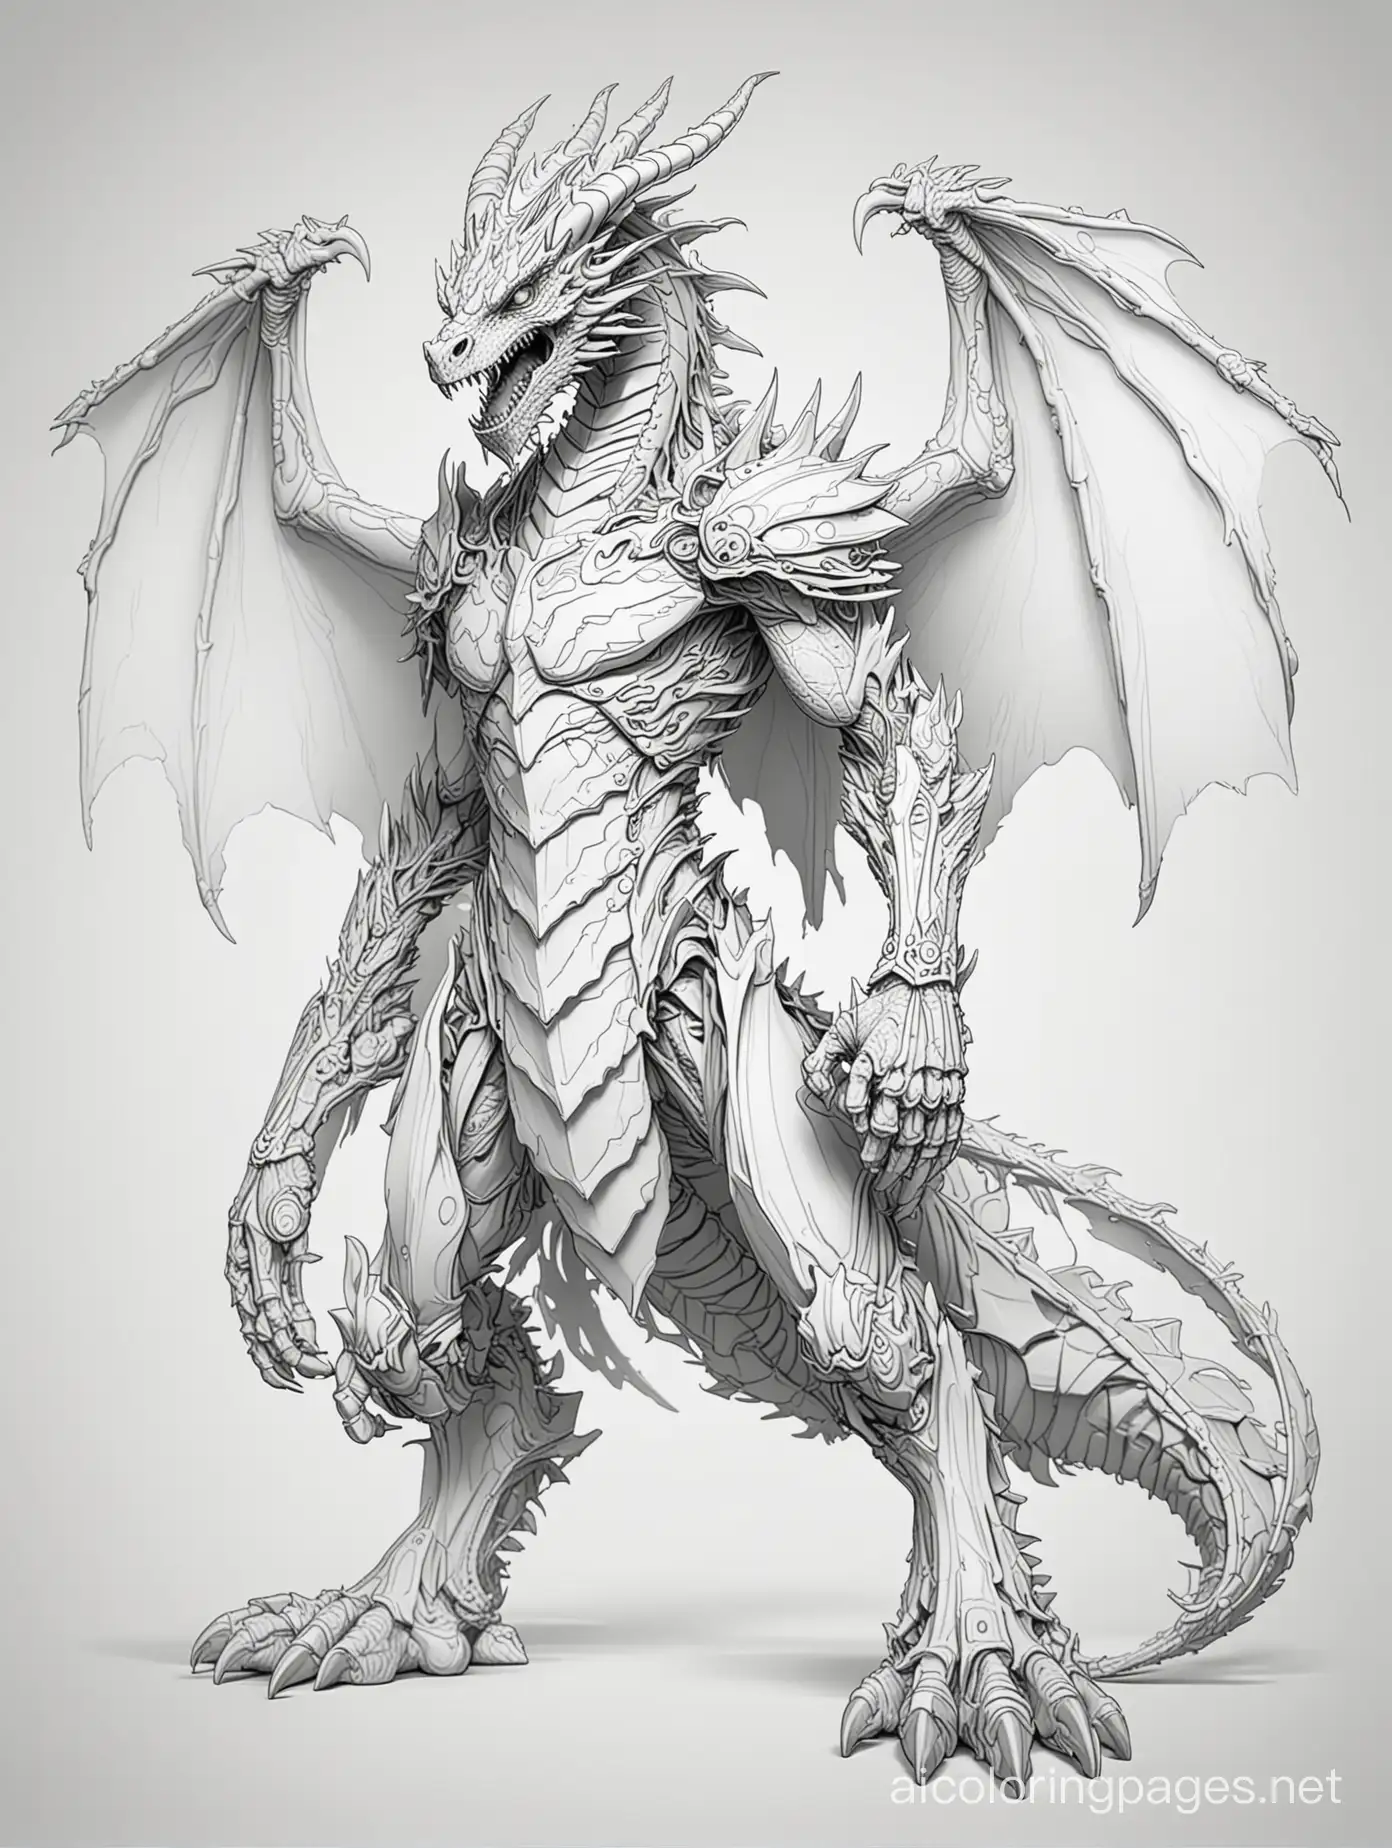 Bone-Titan-Dragon-Coloring-Page-with-Ample-White-Space-for-Easy-Coloring